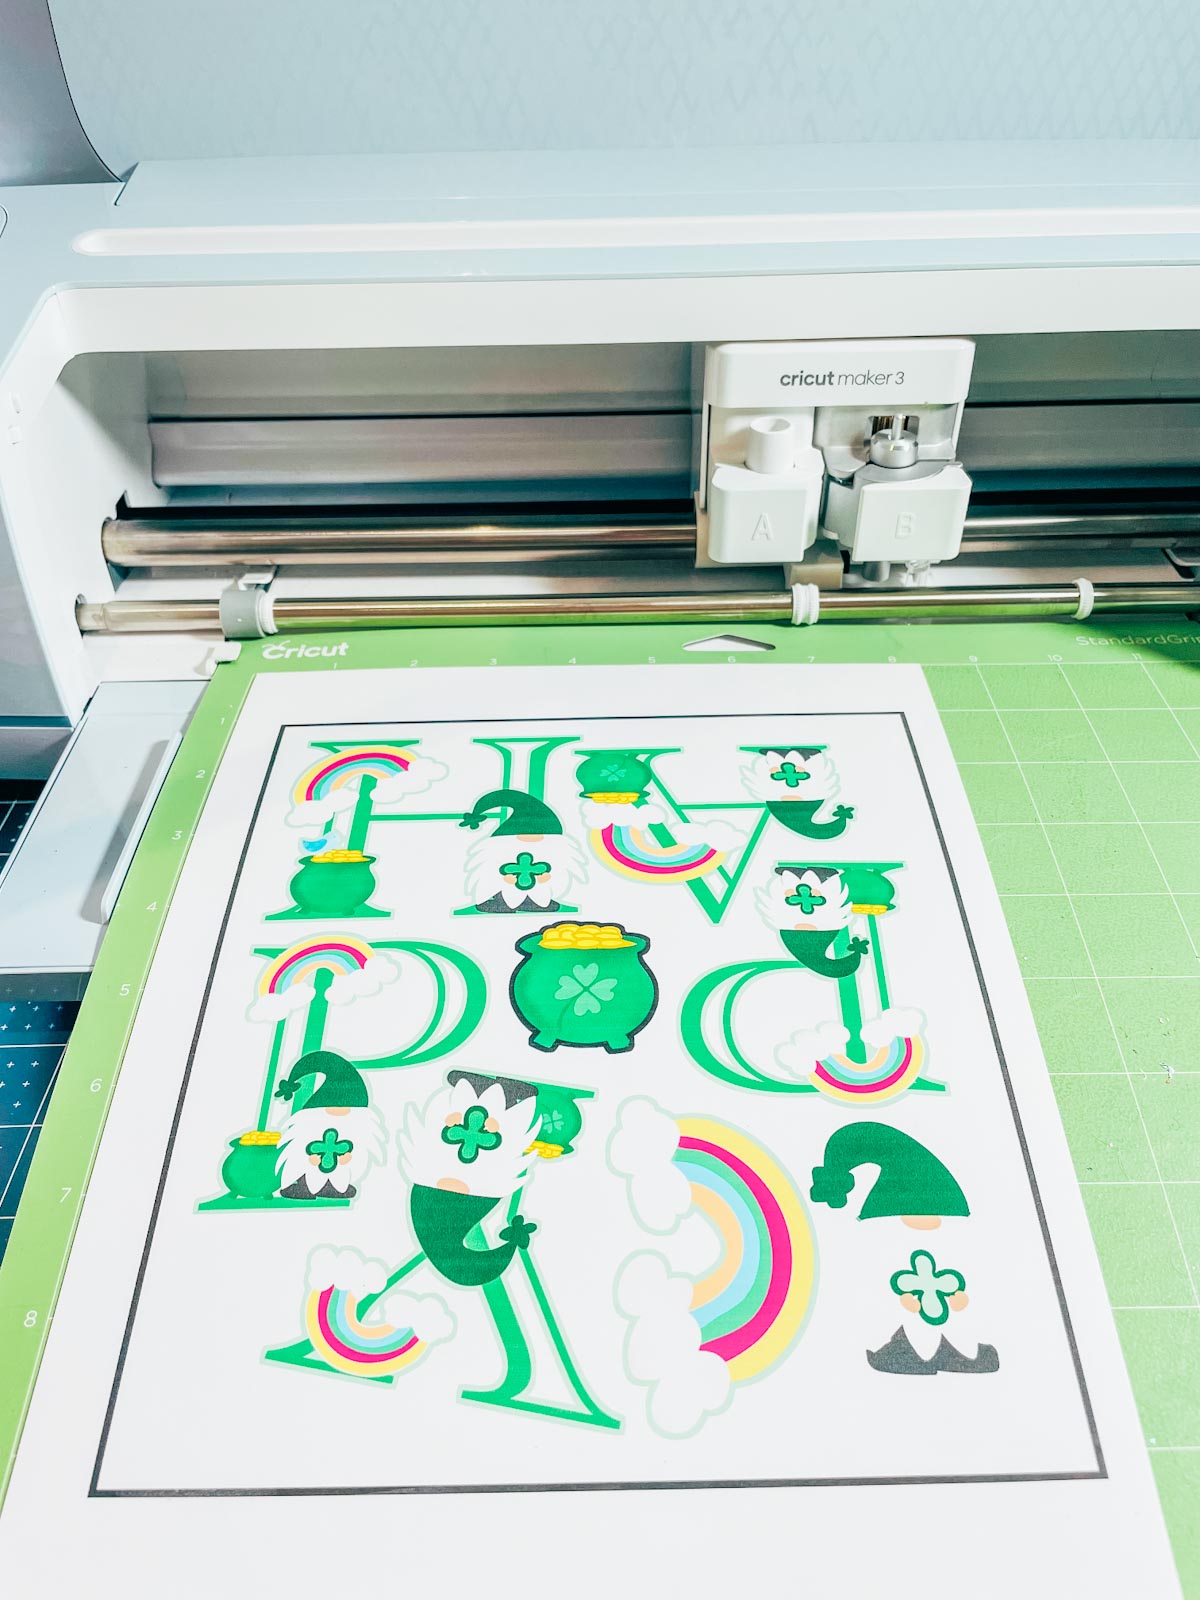 How to print and cut stickers in Cricut